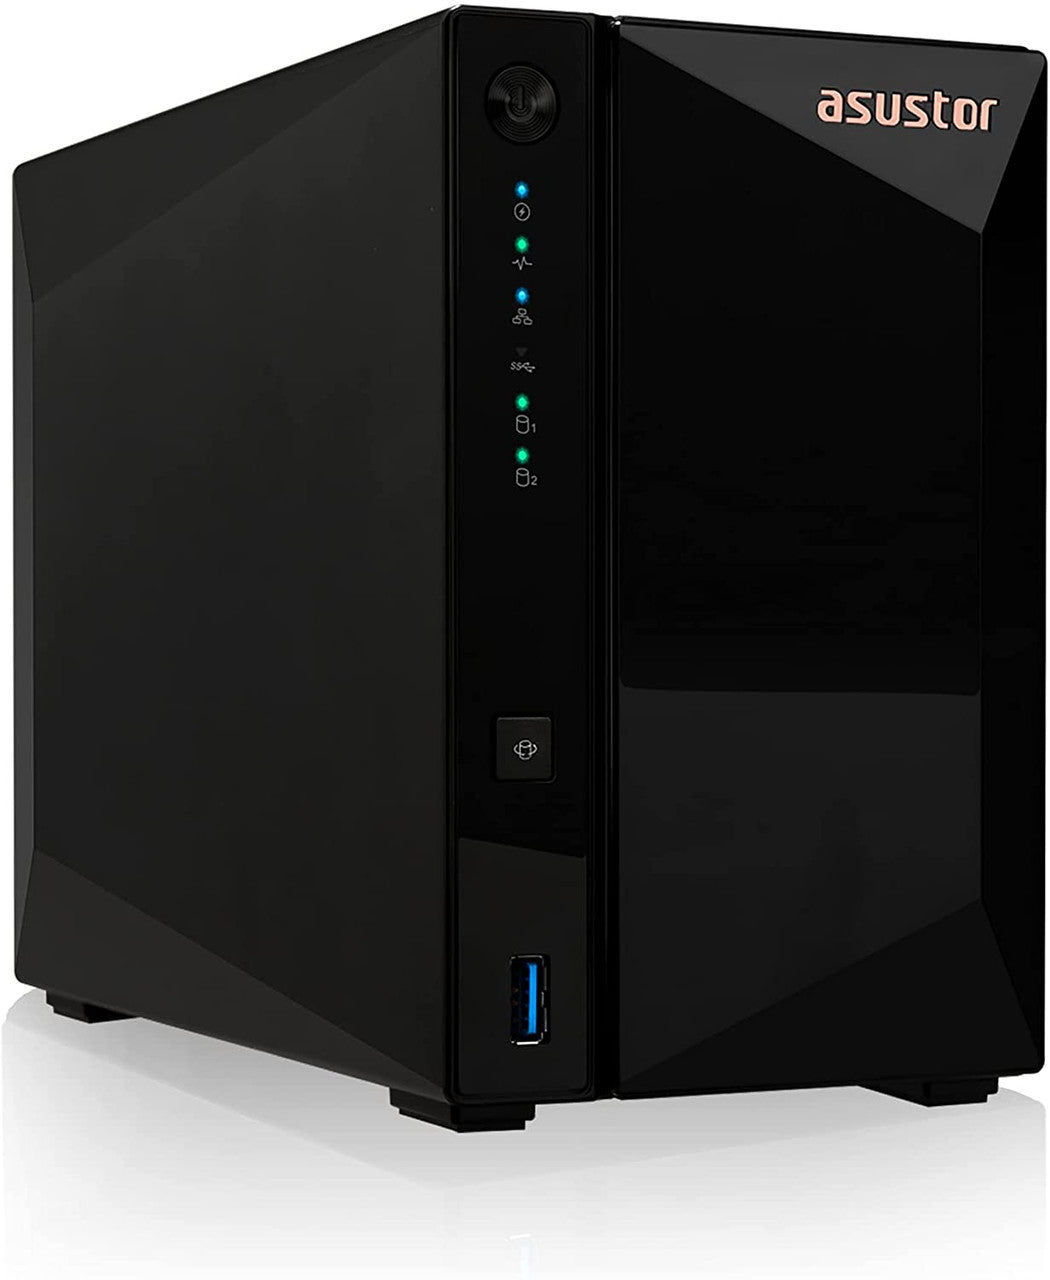 Asustor AS3302T 2-Bay Drivestor 2 PRO NAS with 2GB RAM and 20TB (2x10TB) Seagate Ironwolf NAS Drives Fully Assembled and Tested